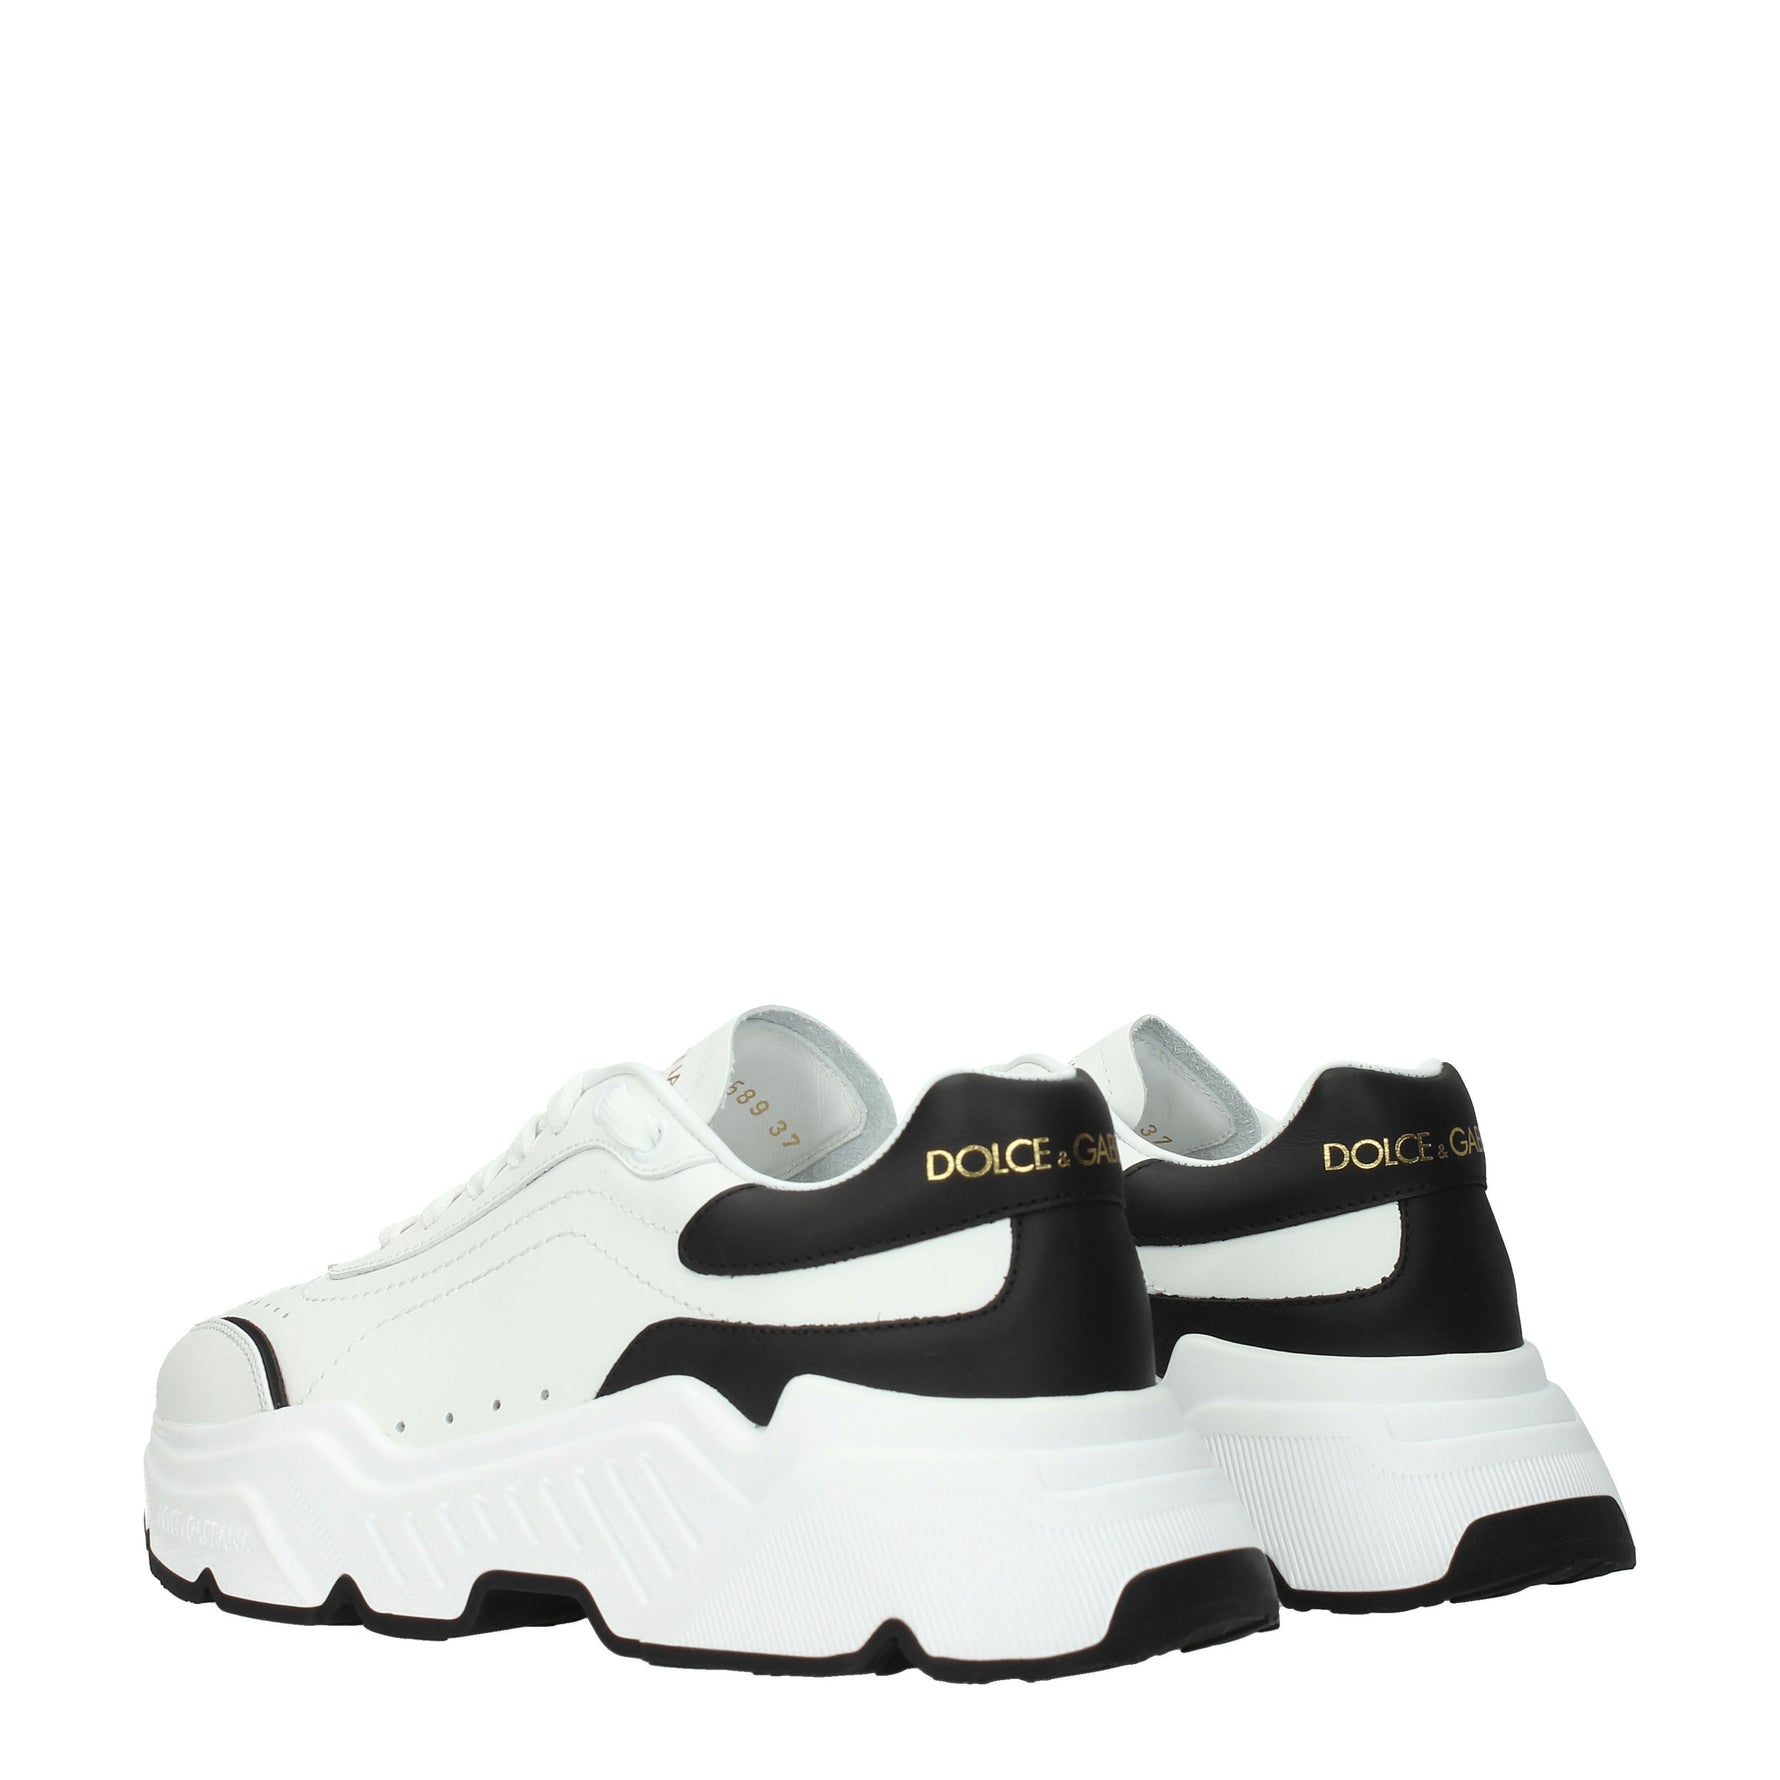 Dolce&Gabbana Sneakers daymaster Donna Pelle Bianco Nero